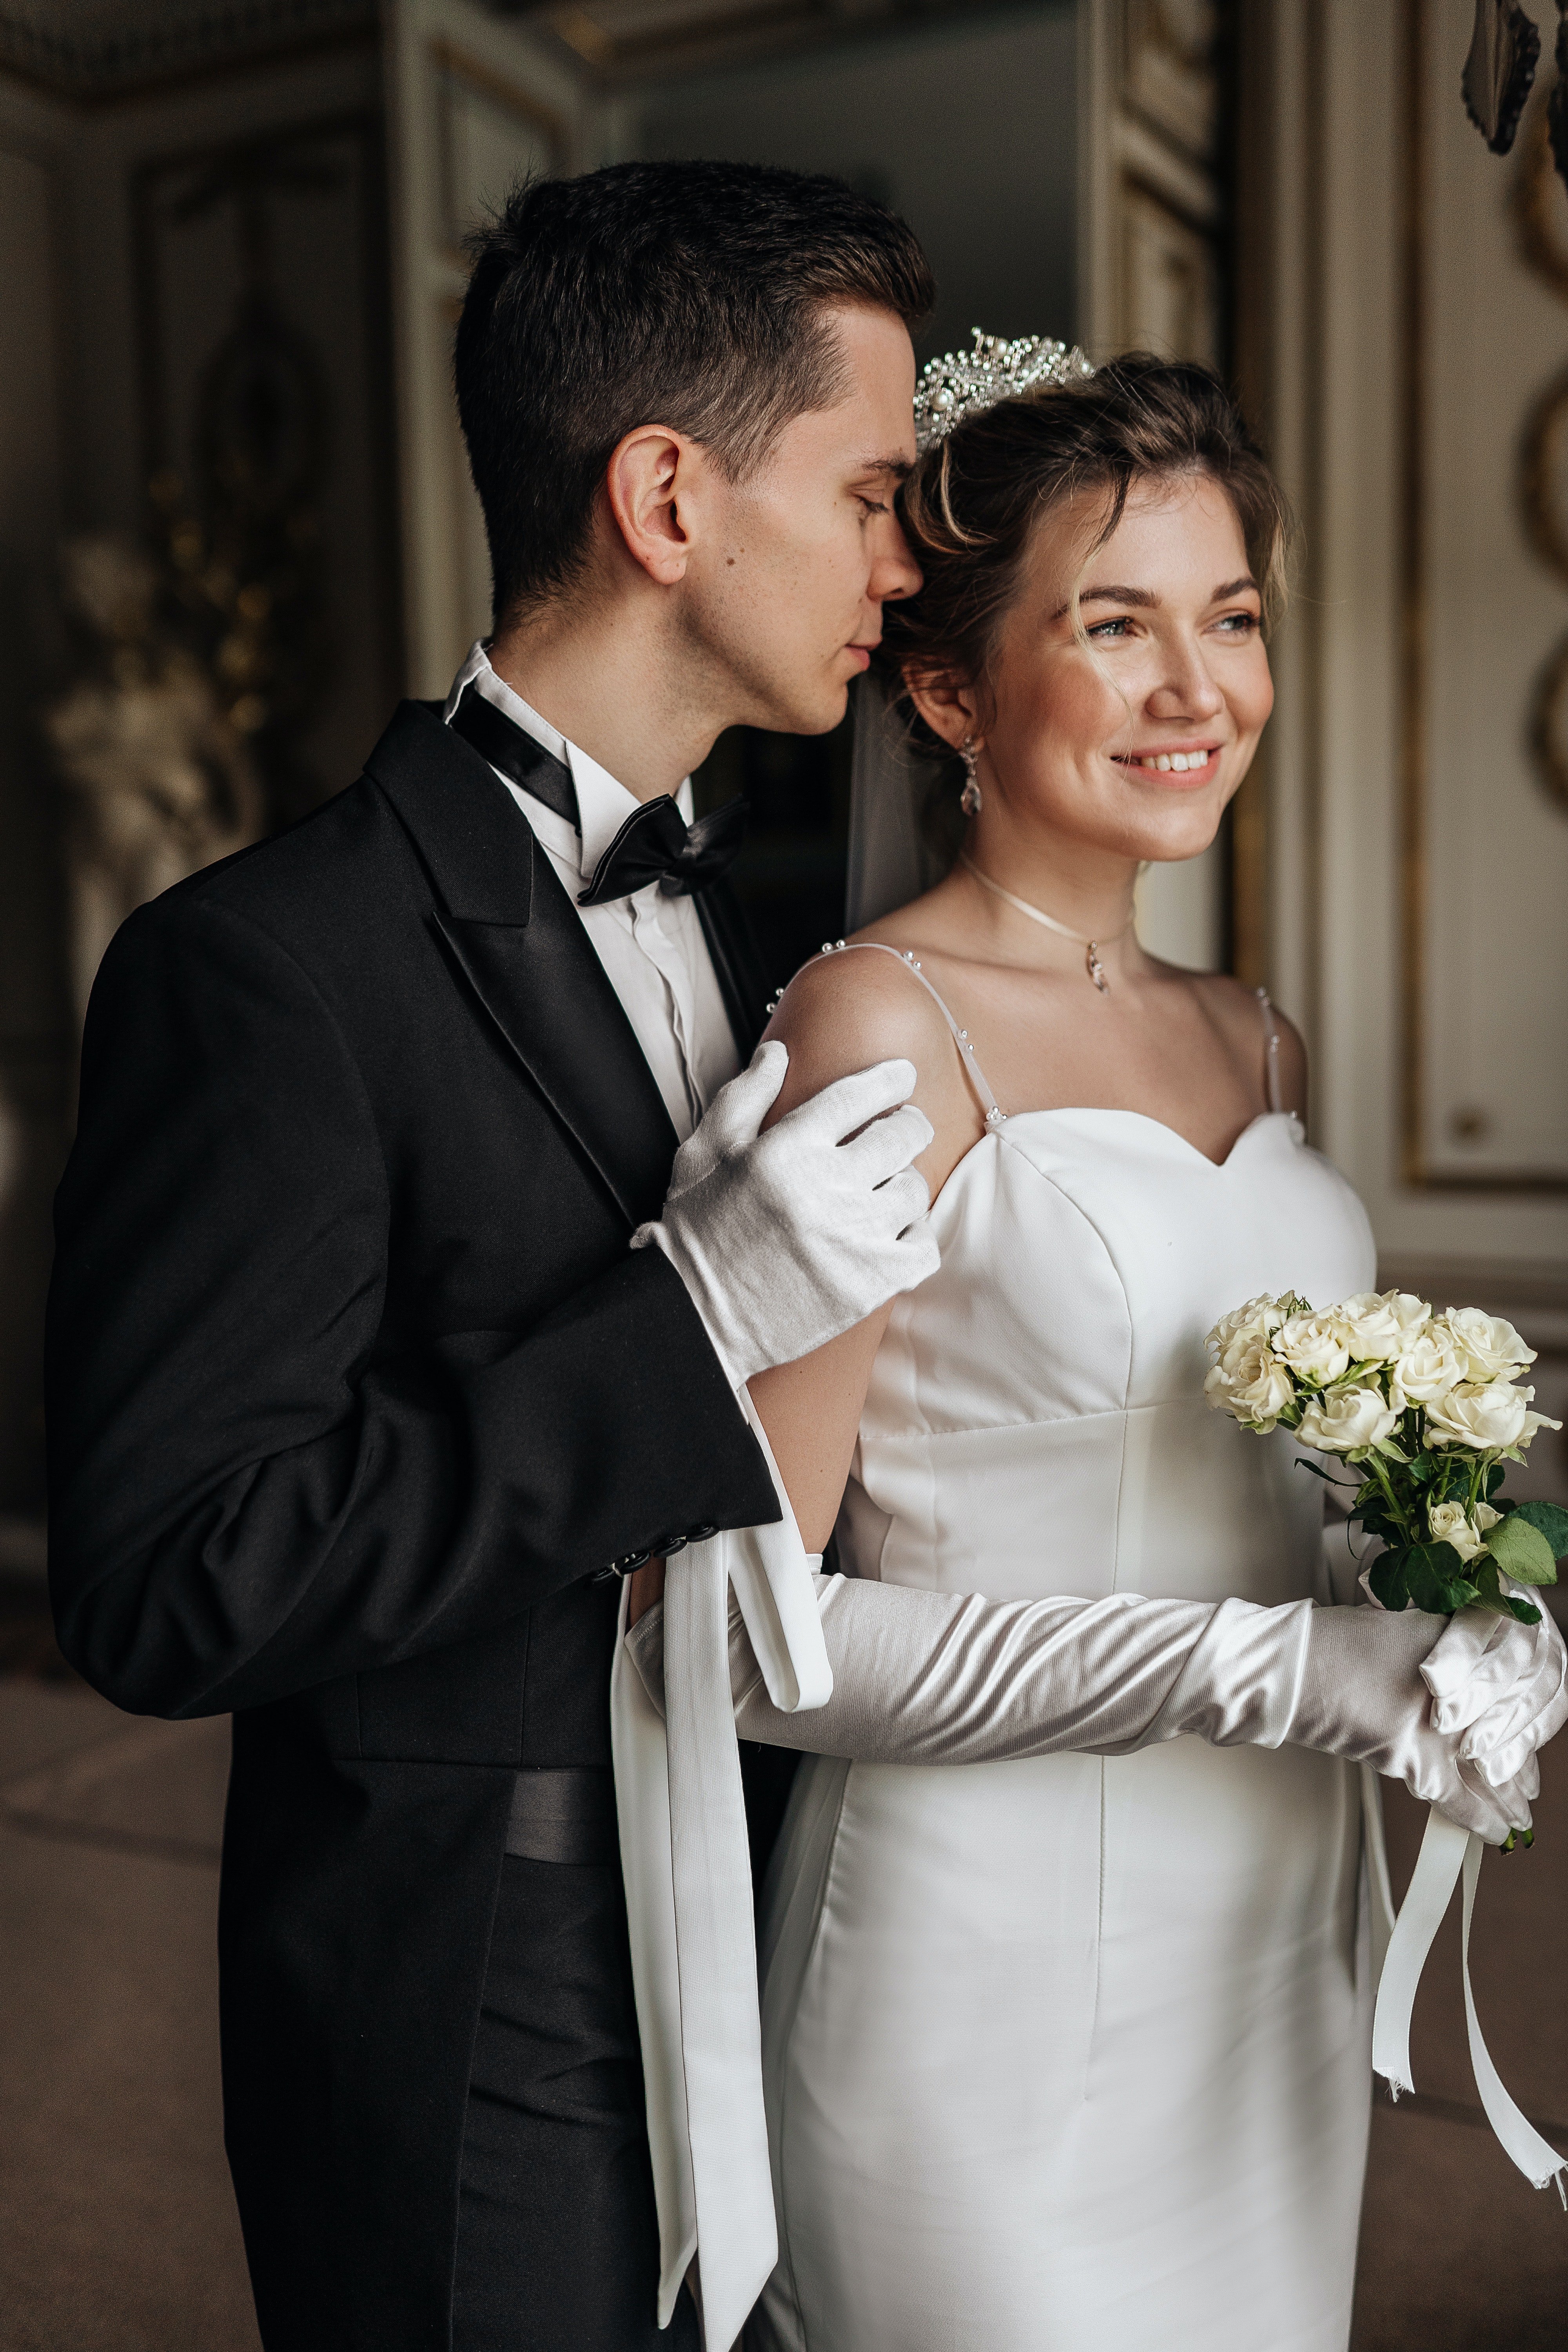 Robert and Elizabeth's wedding pushed through with the help of their parents. | Source: Pexels